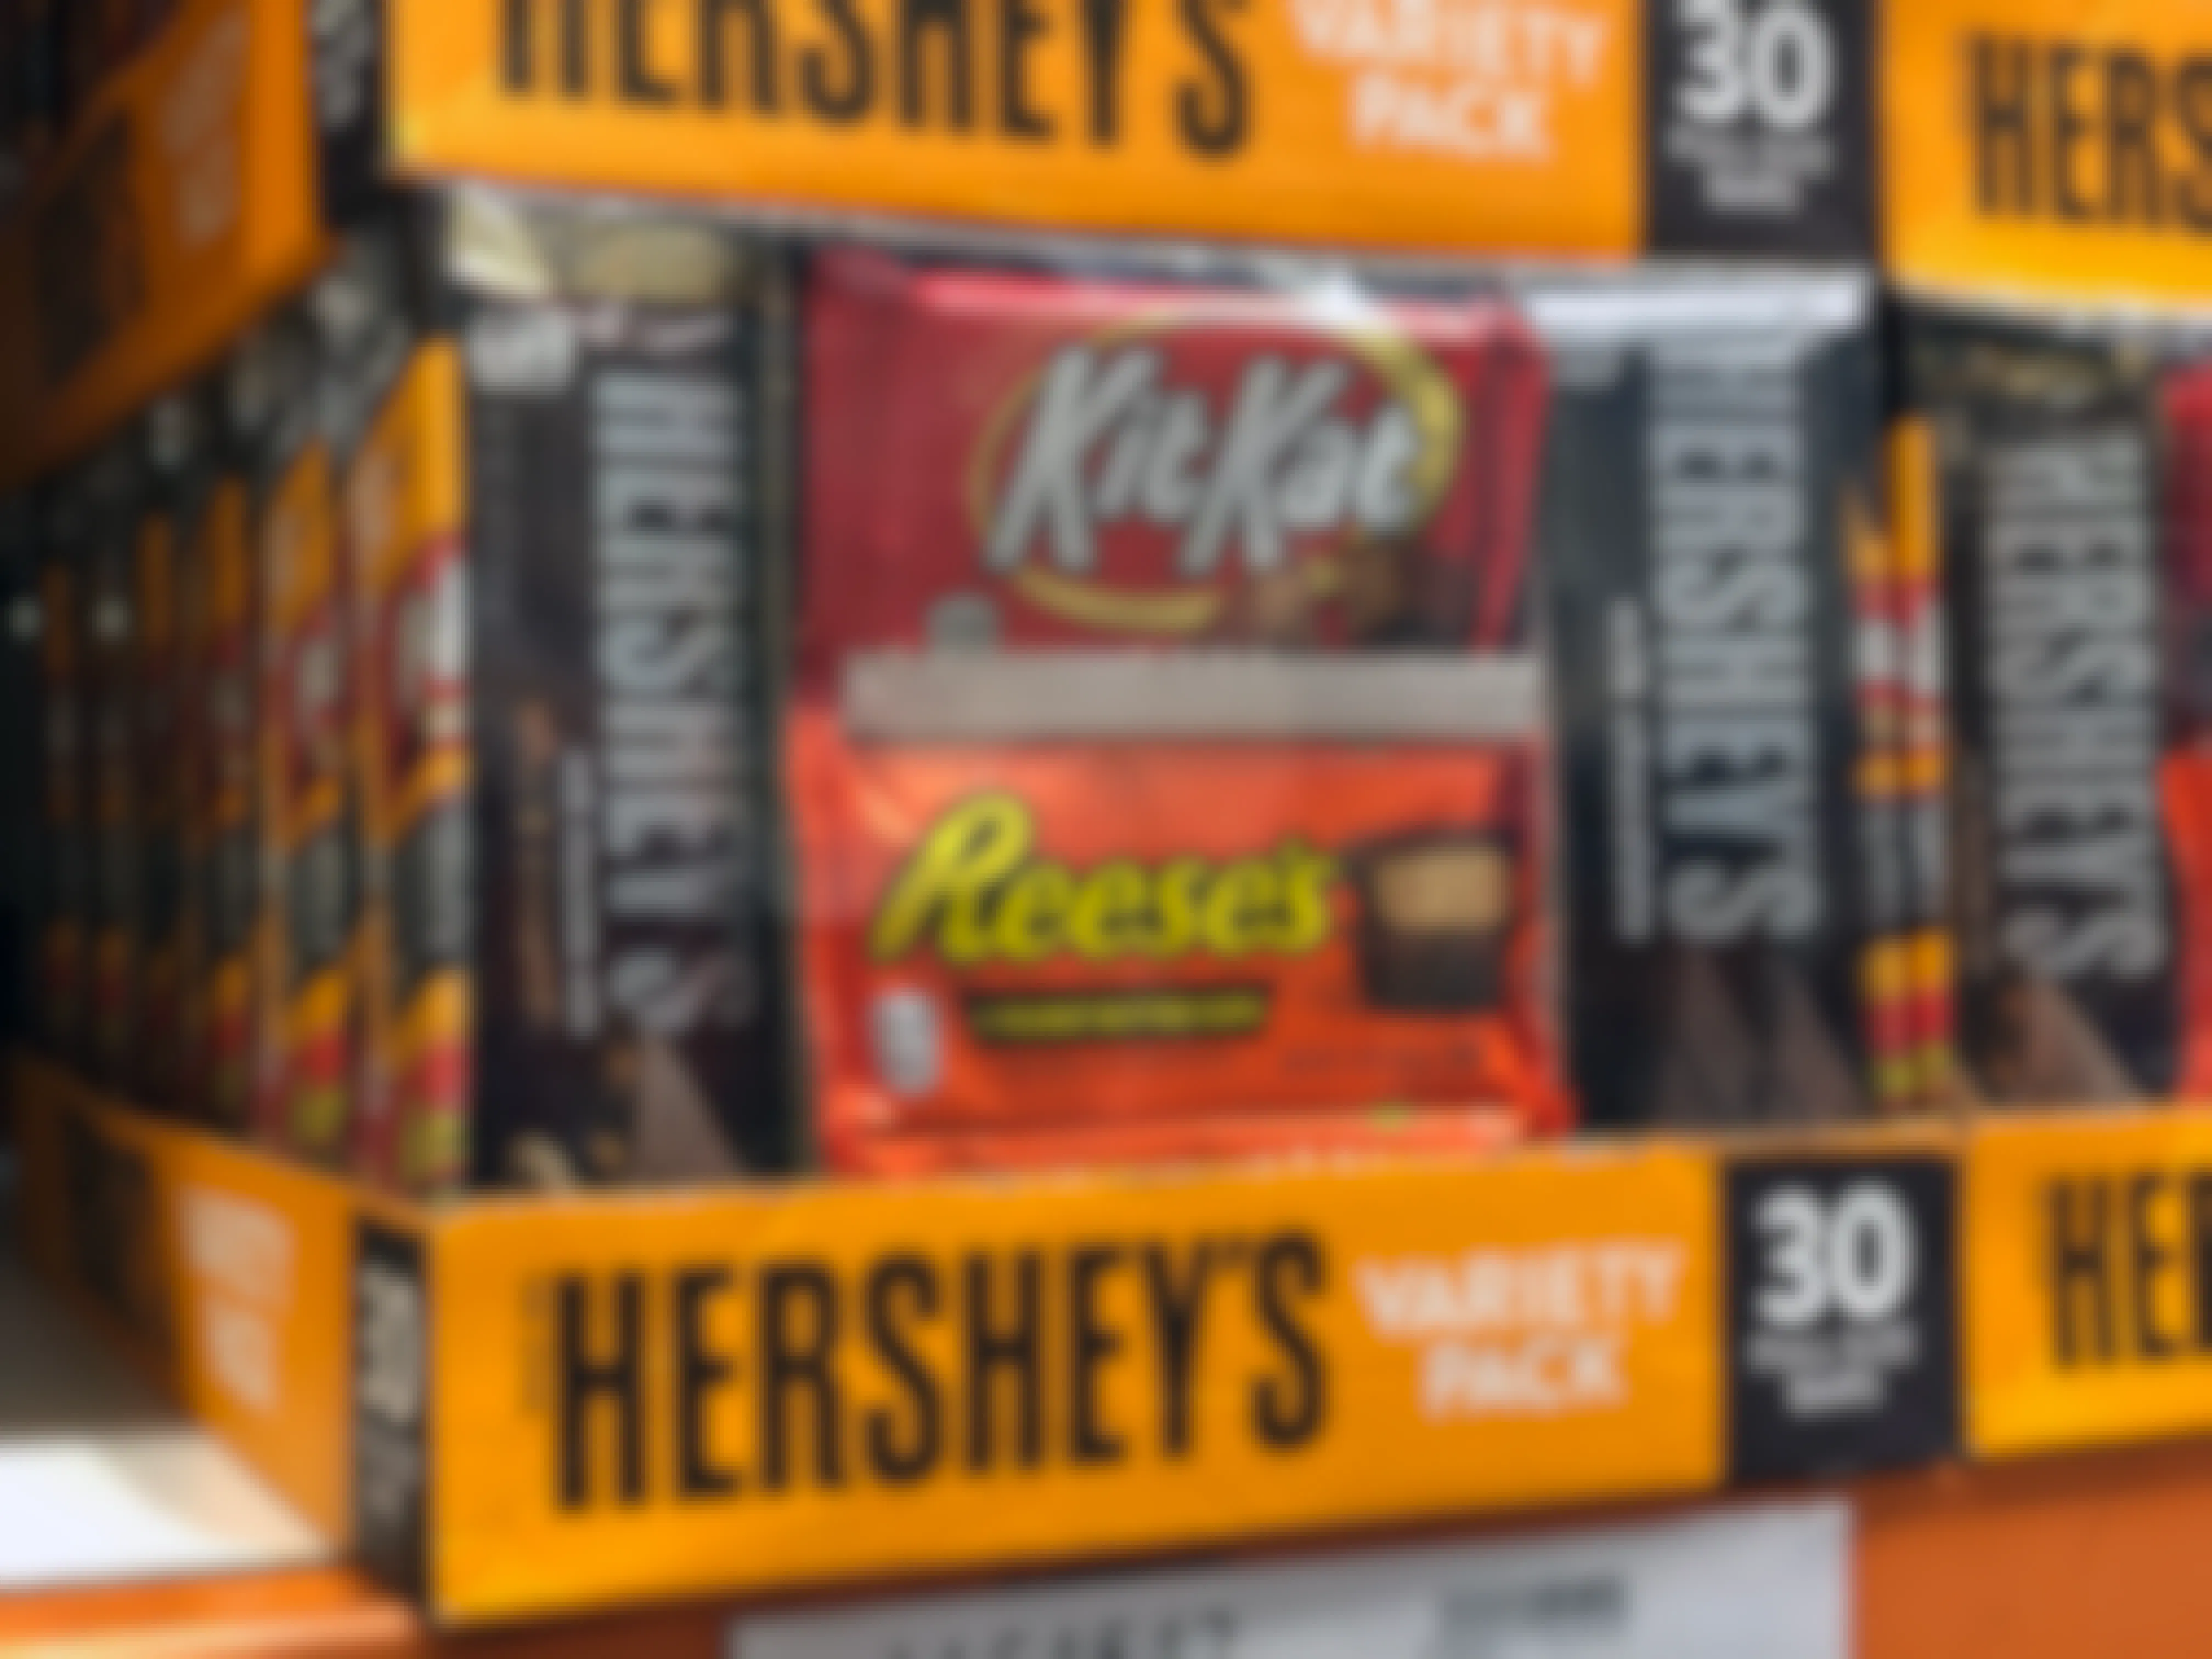 Full size candy bar packs stocked on a Costco shelf.